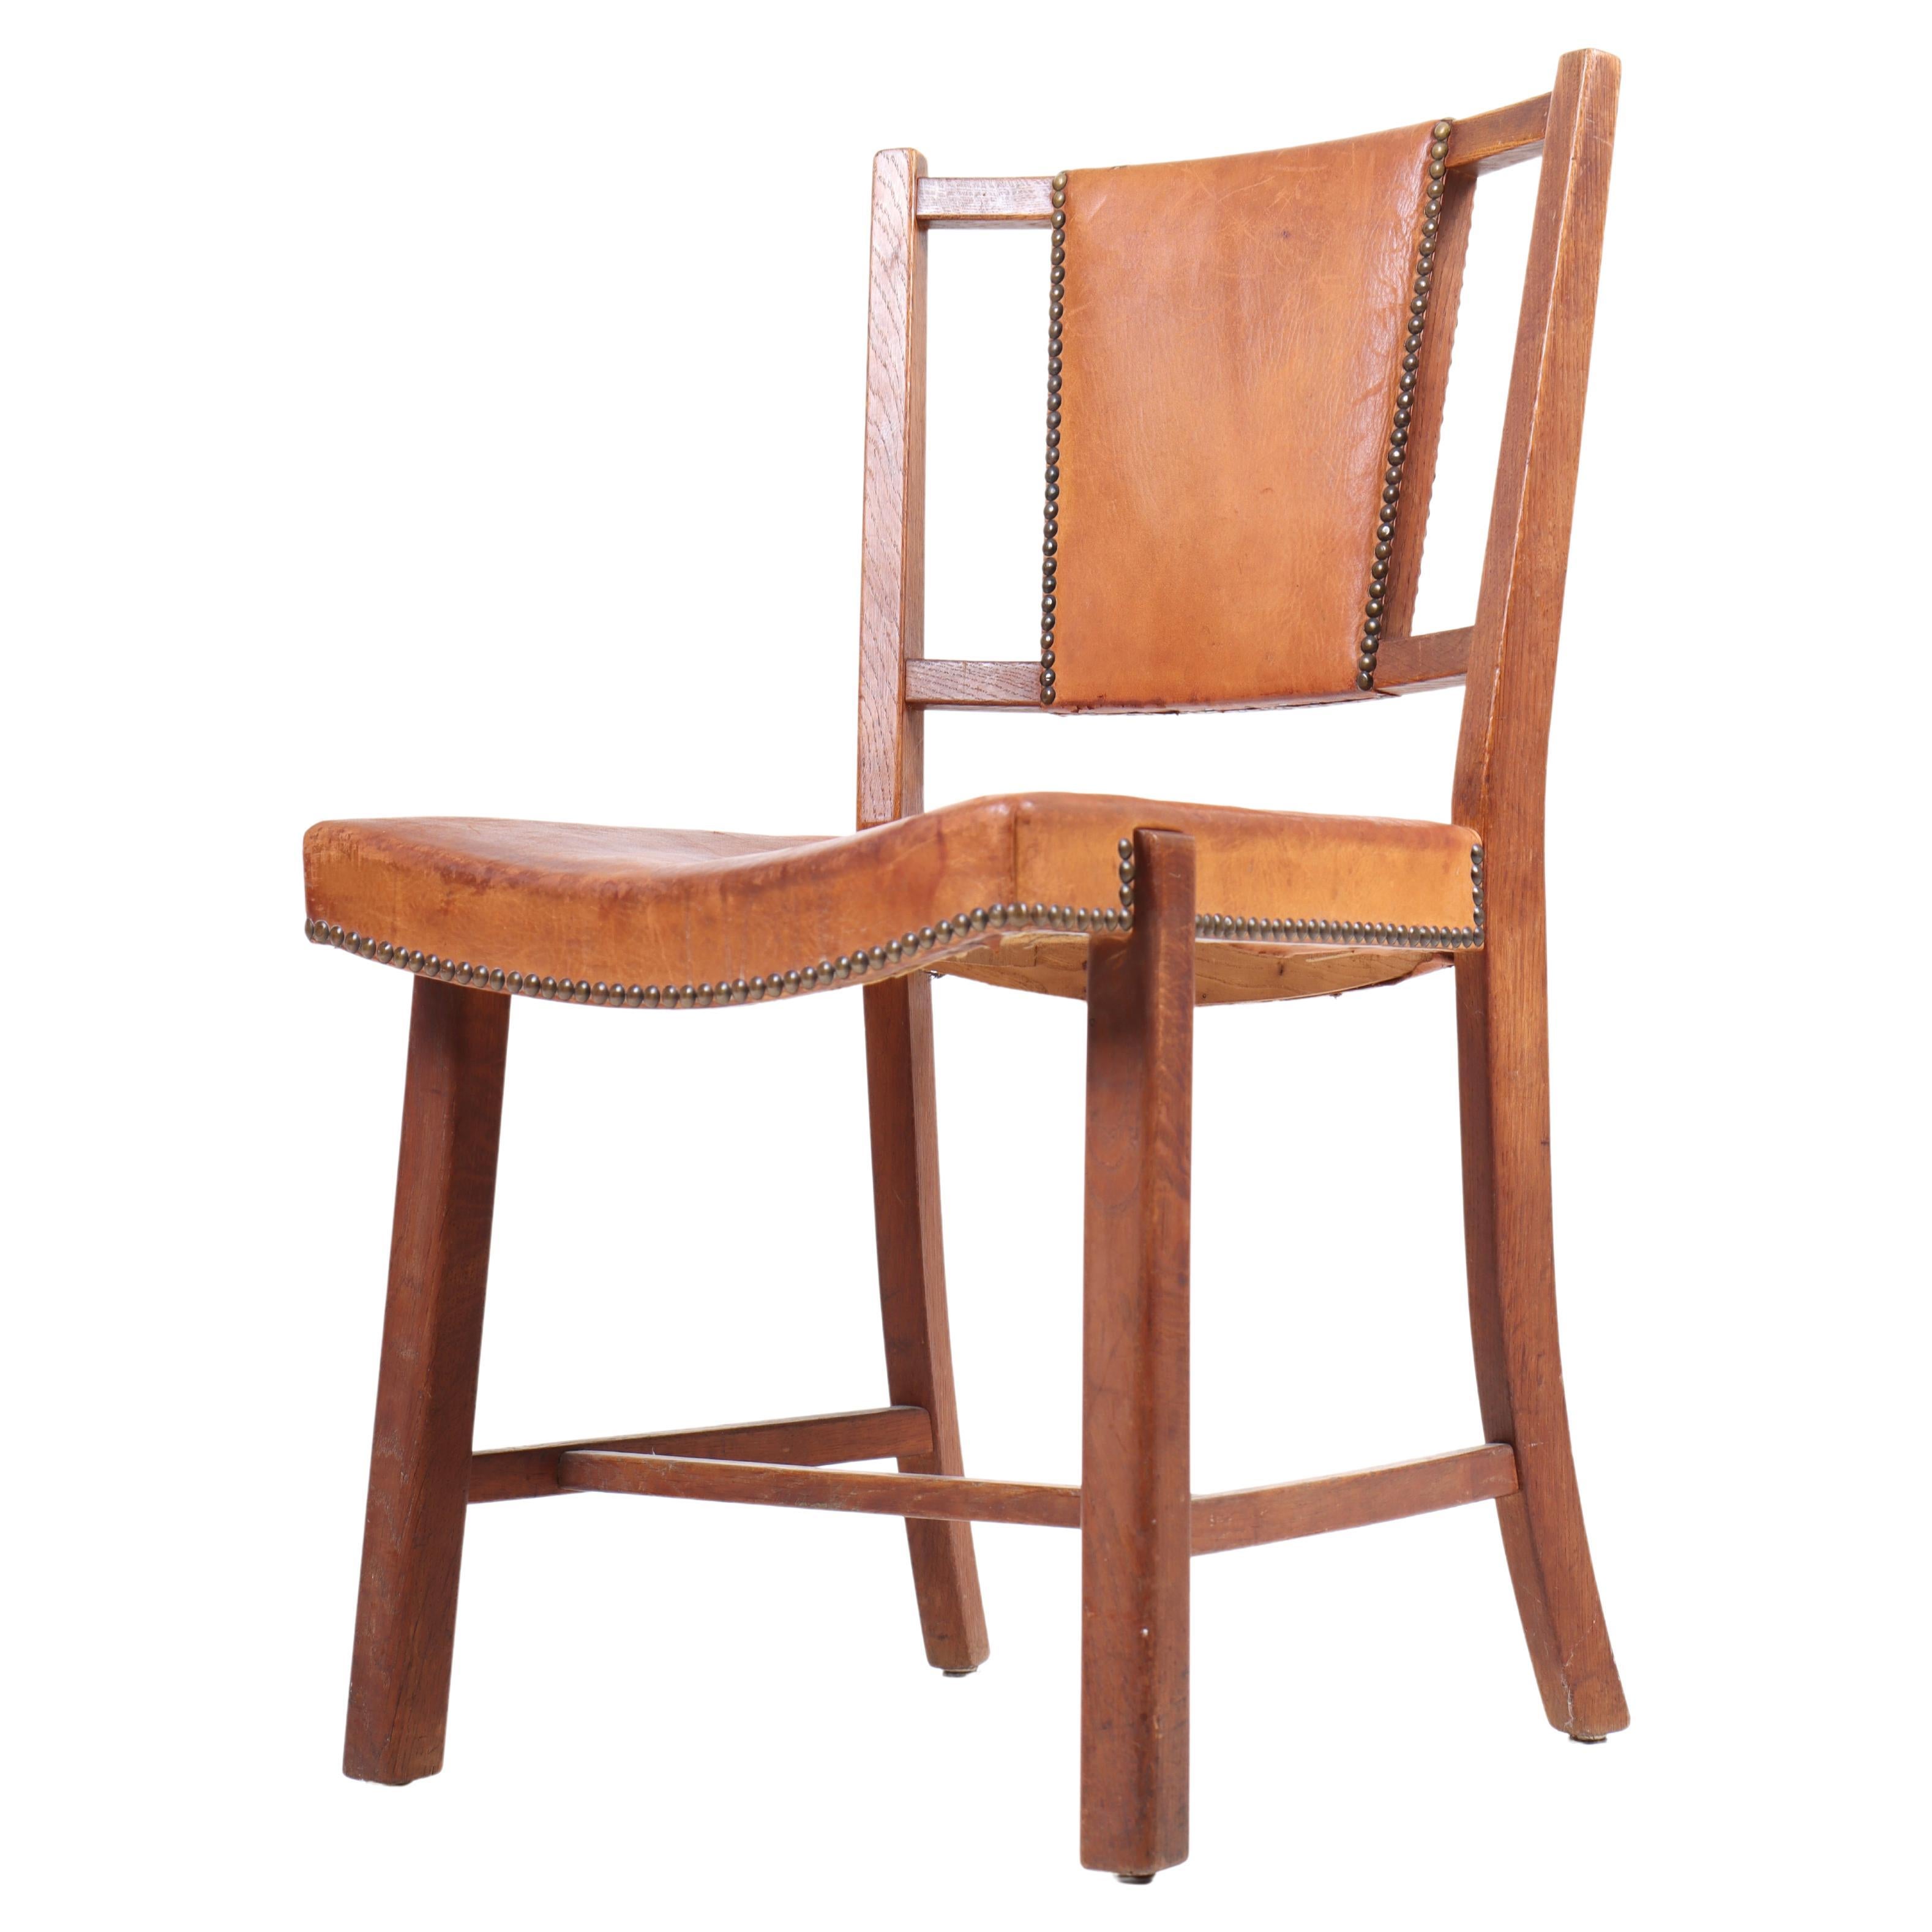 Danish Side Chair in Patinated Leather, 1940s